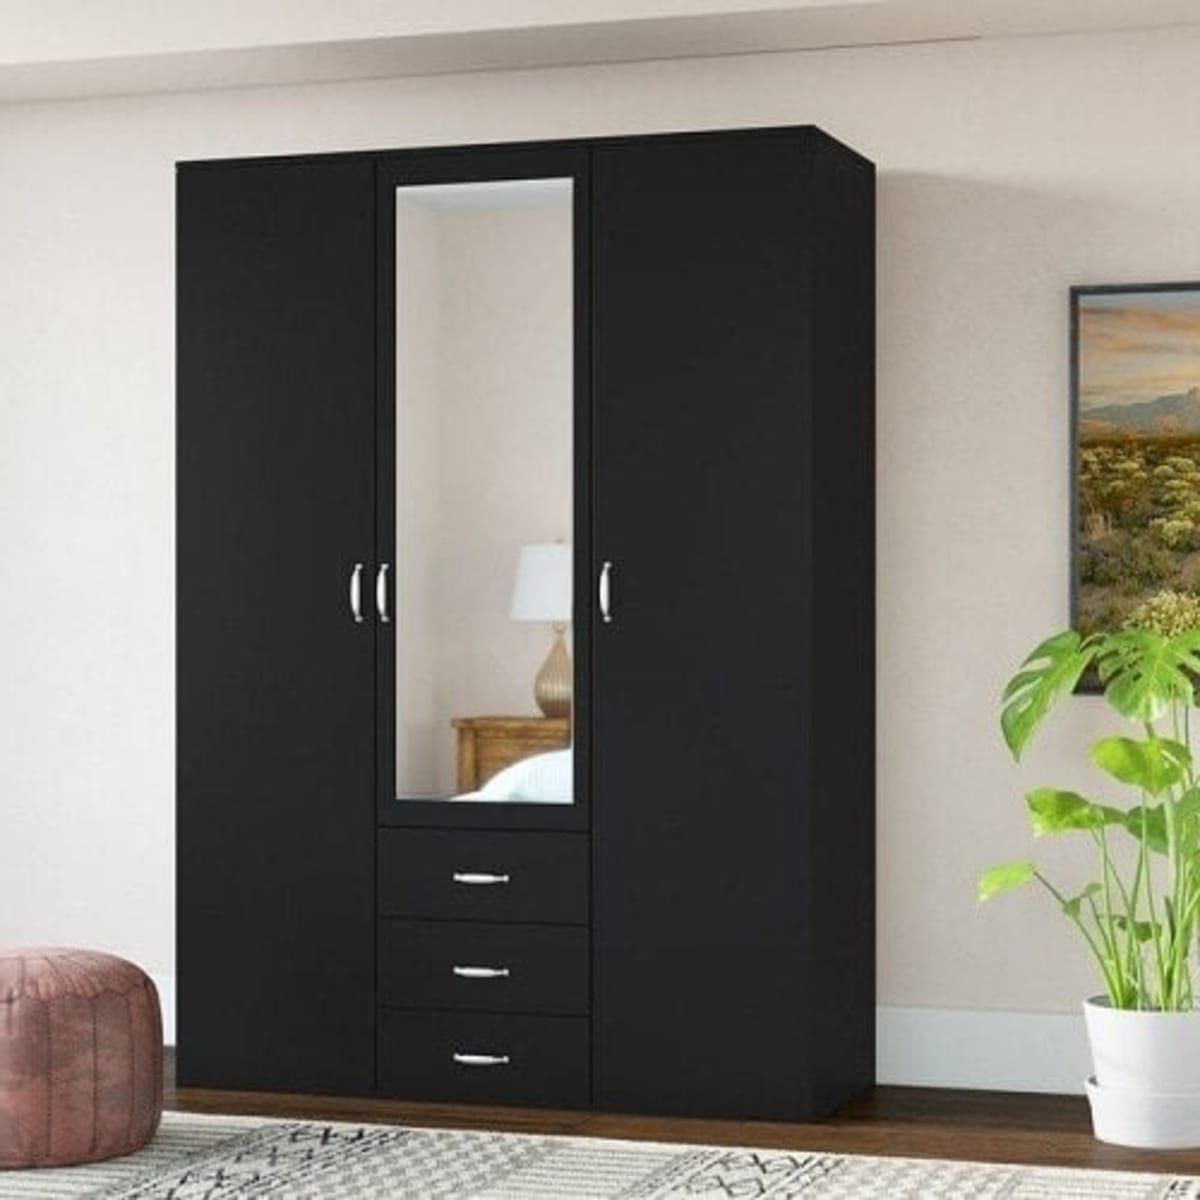 Beyond 3 Door Wardrobe With 3 Drawer And Mirror Black | Konga Online  Shopping Within Wardrobes 3 Door With Mirror (Gallery 6 of 20)